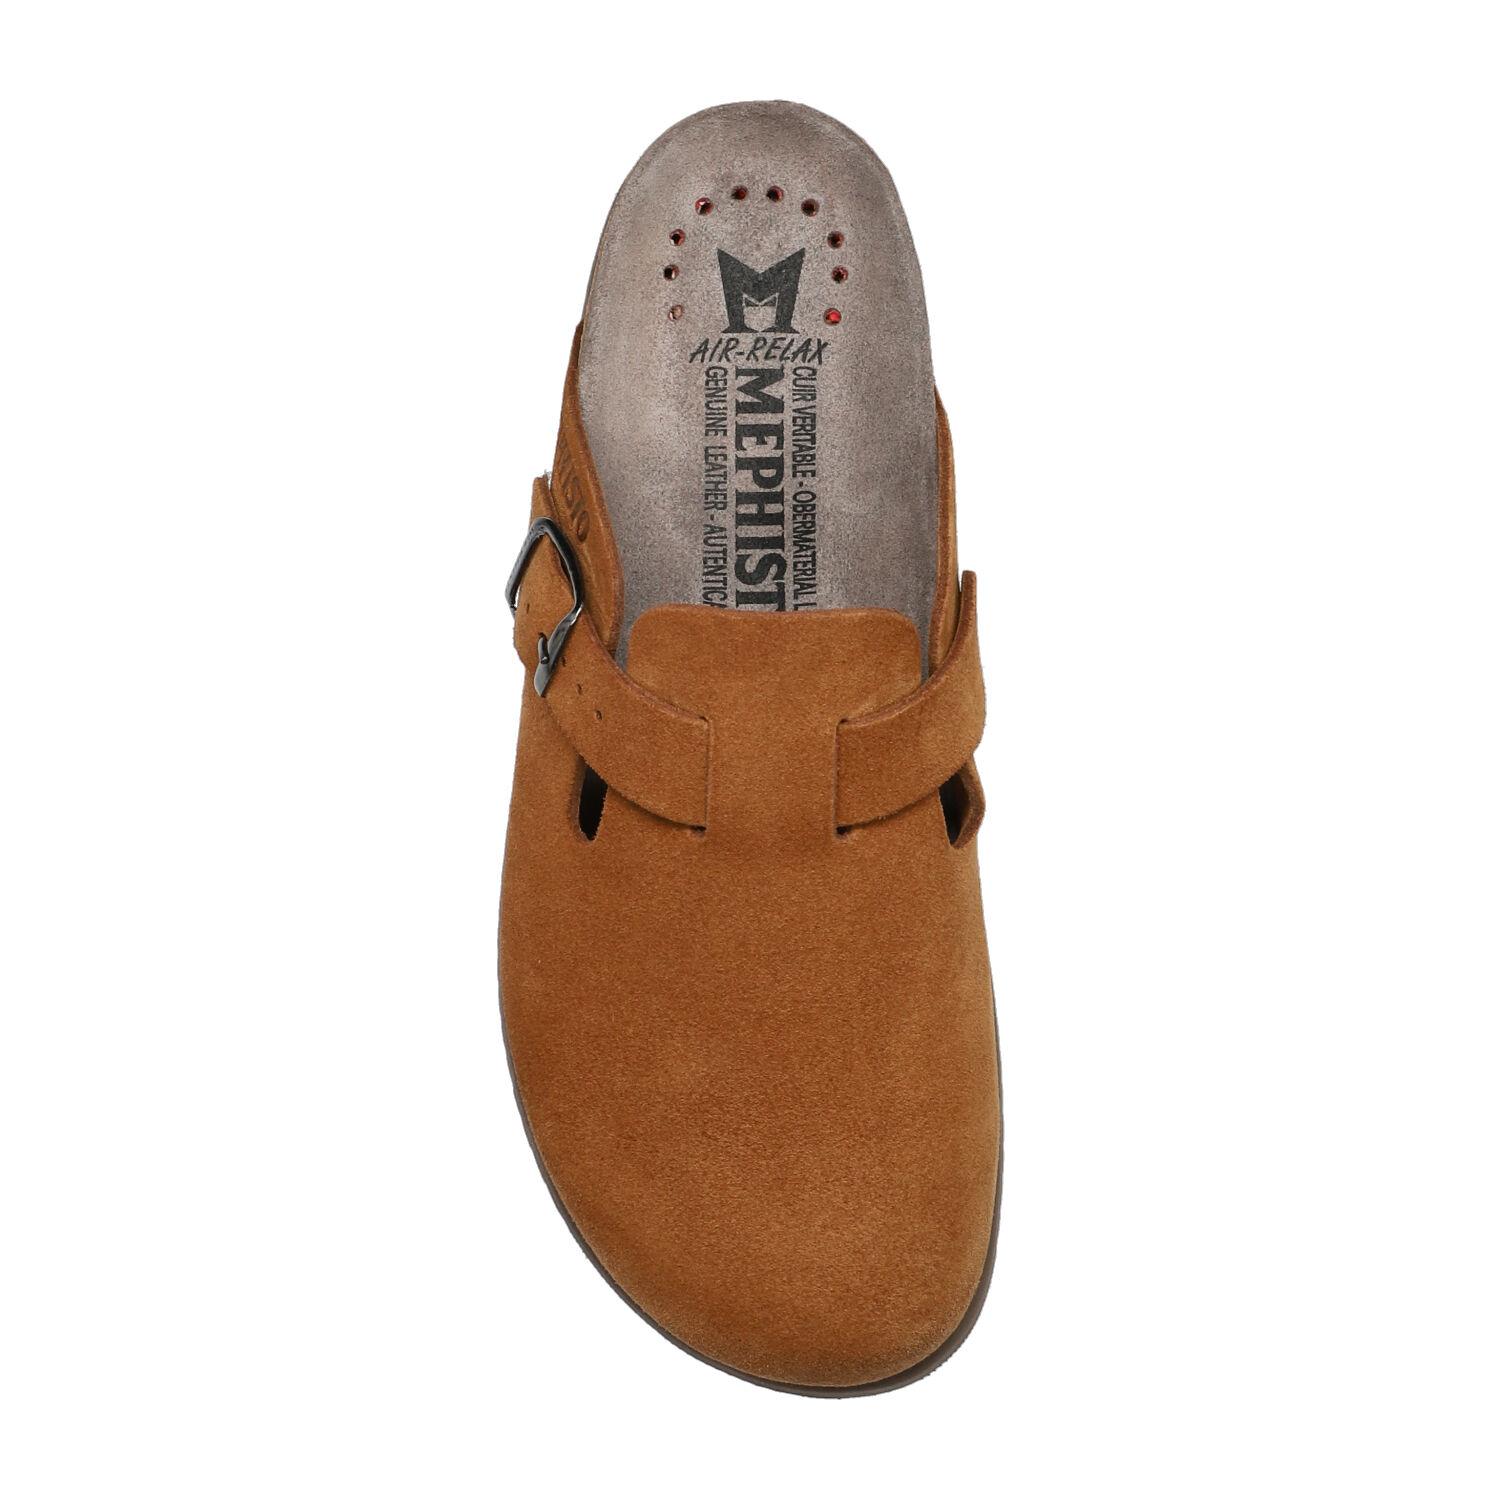 chaussons homme modèle Nathan Nubuck tobacco - Mephisto